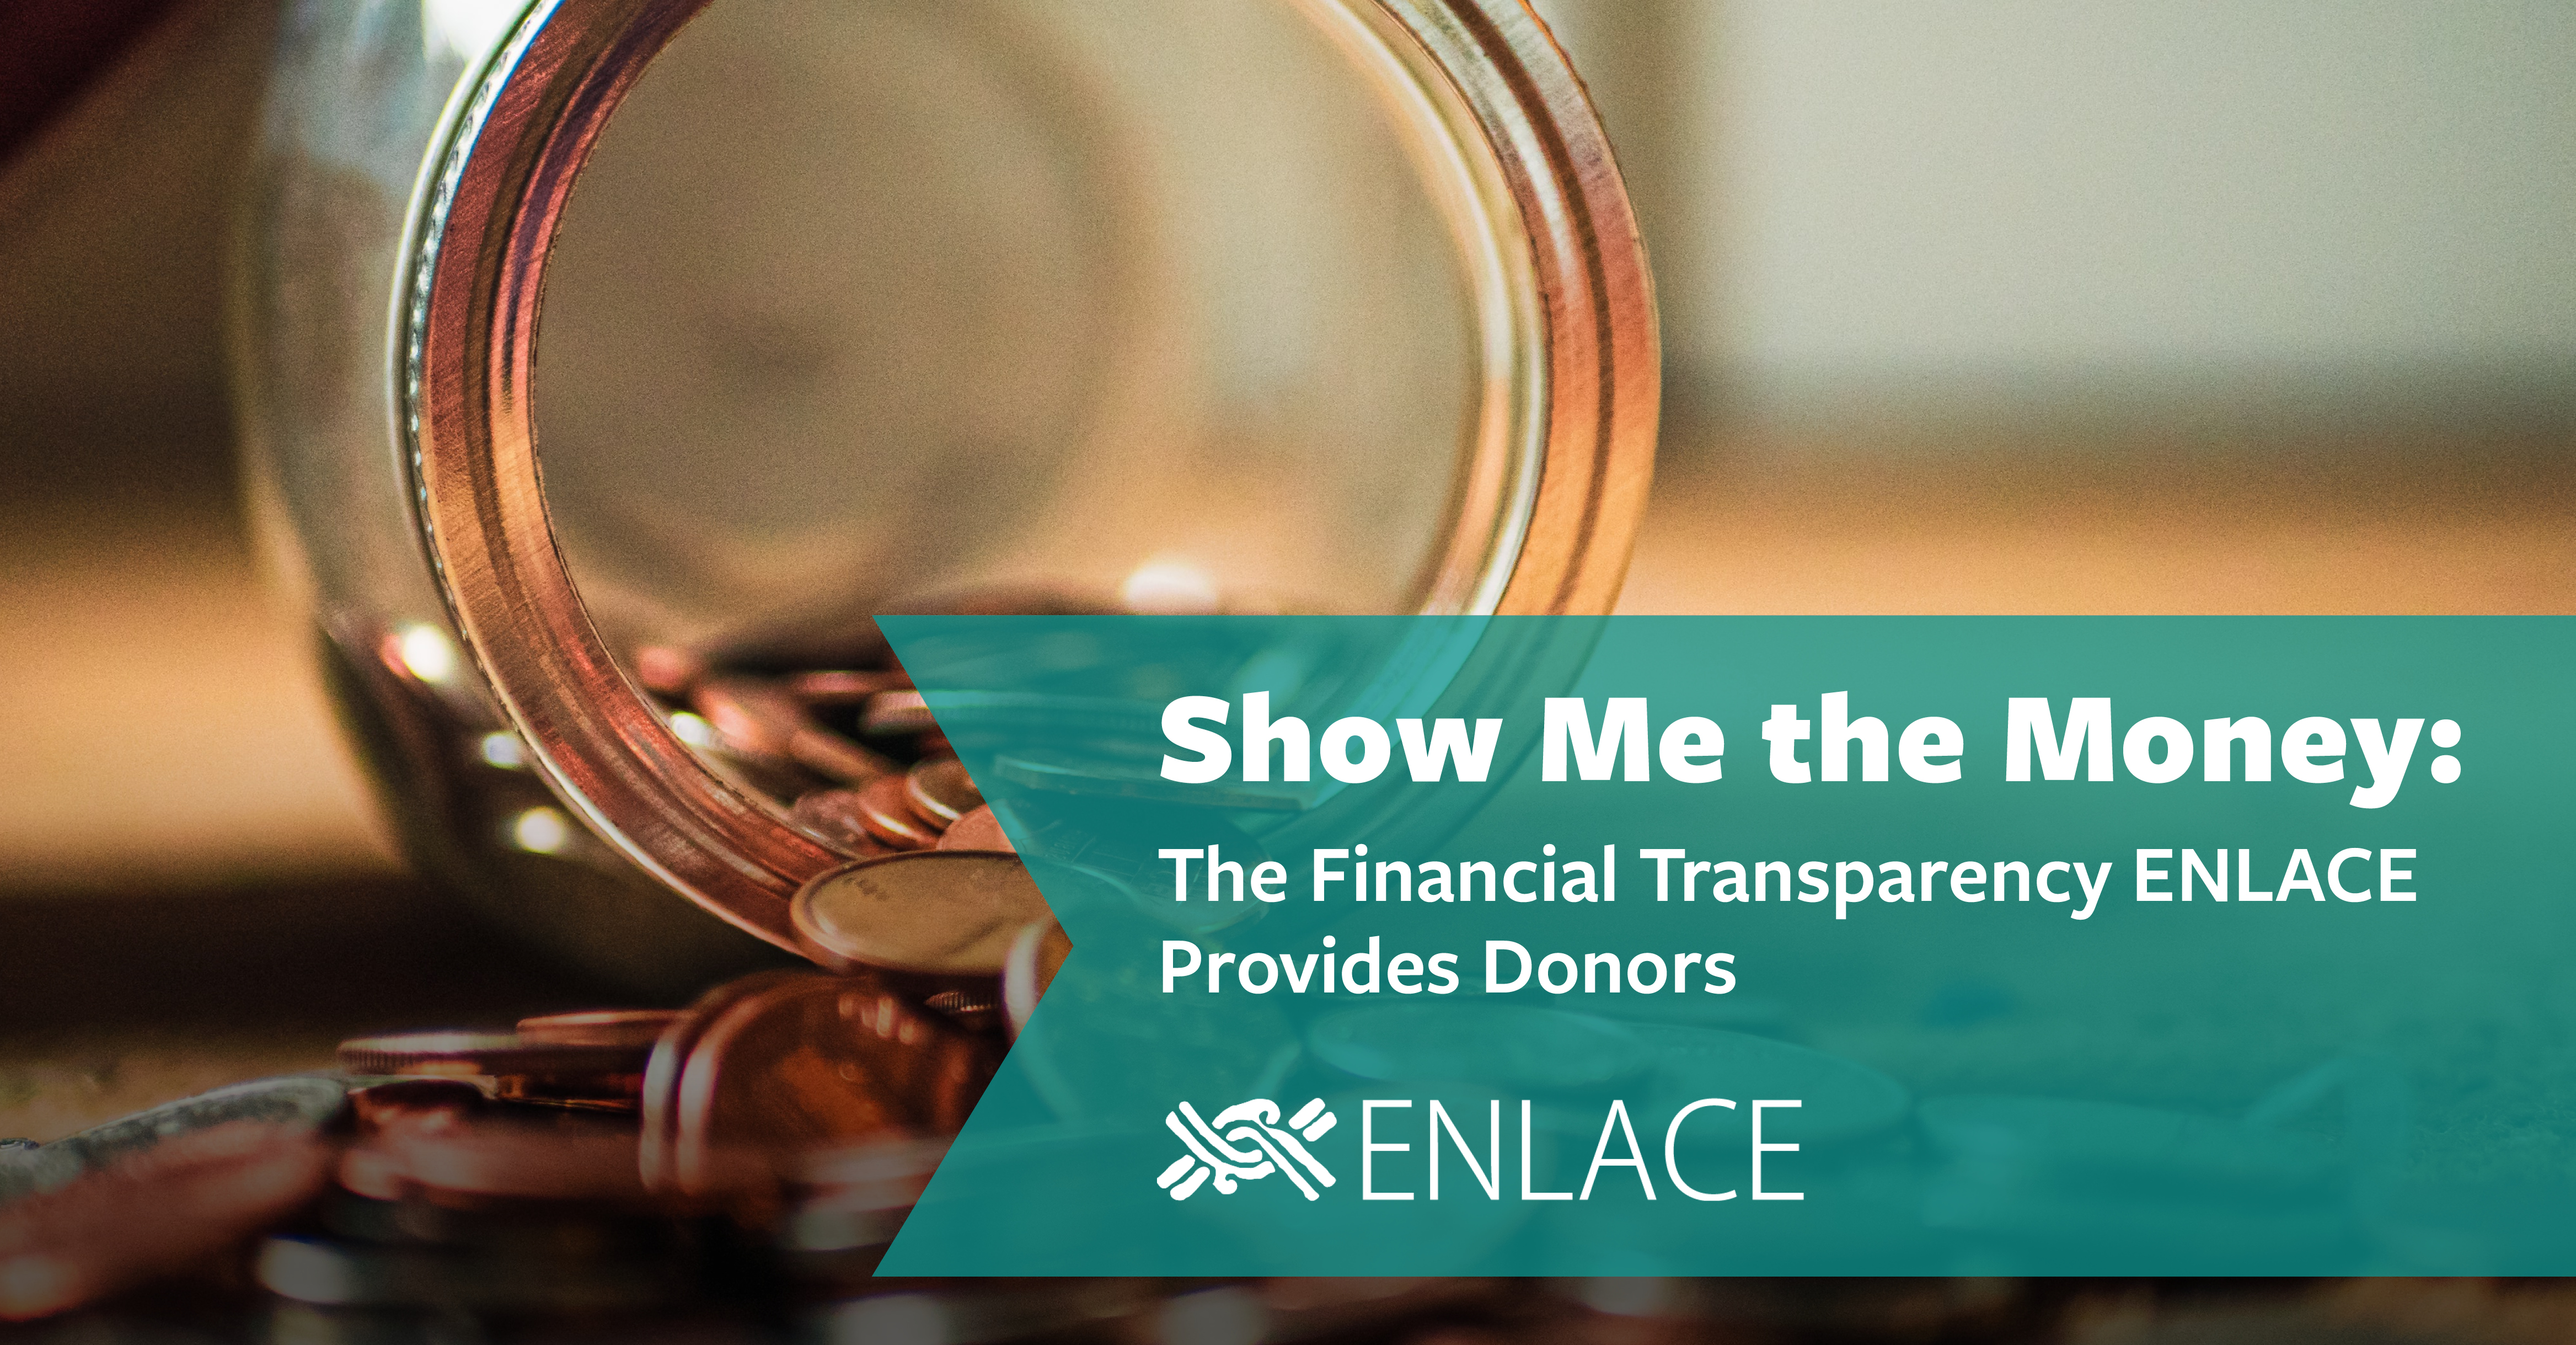 Show Me the Money: The Financial Transparency ENLACE Provides Donors